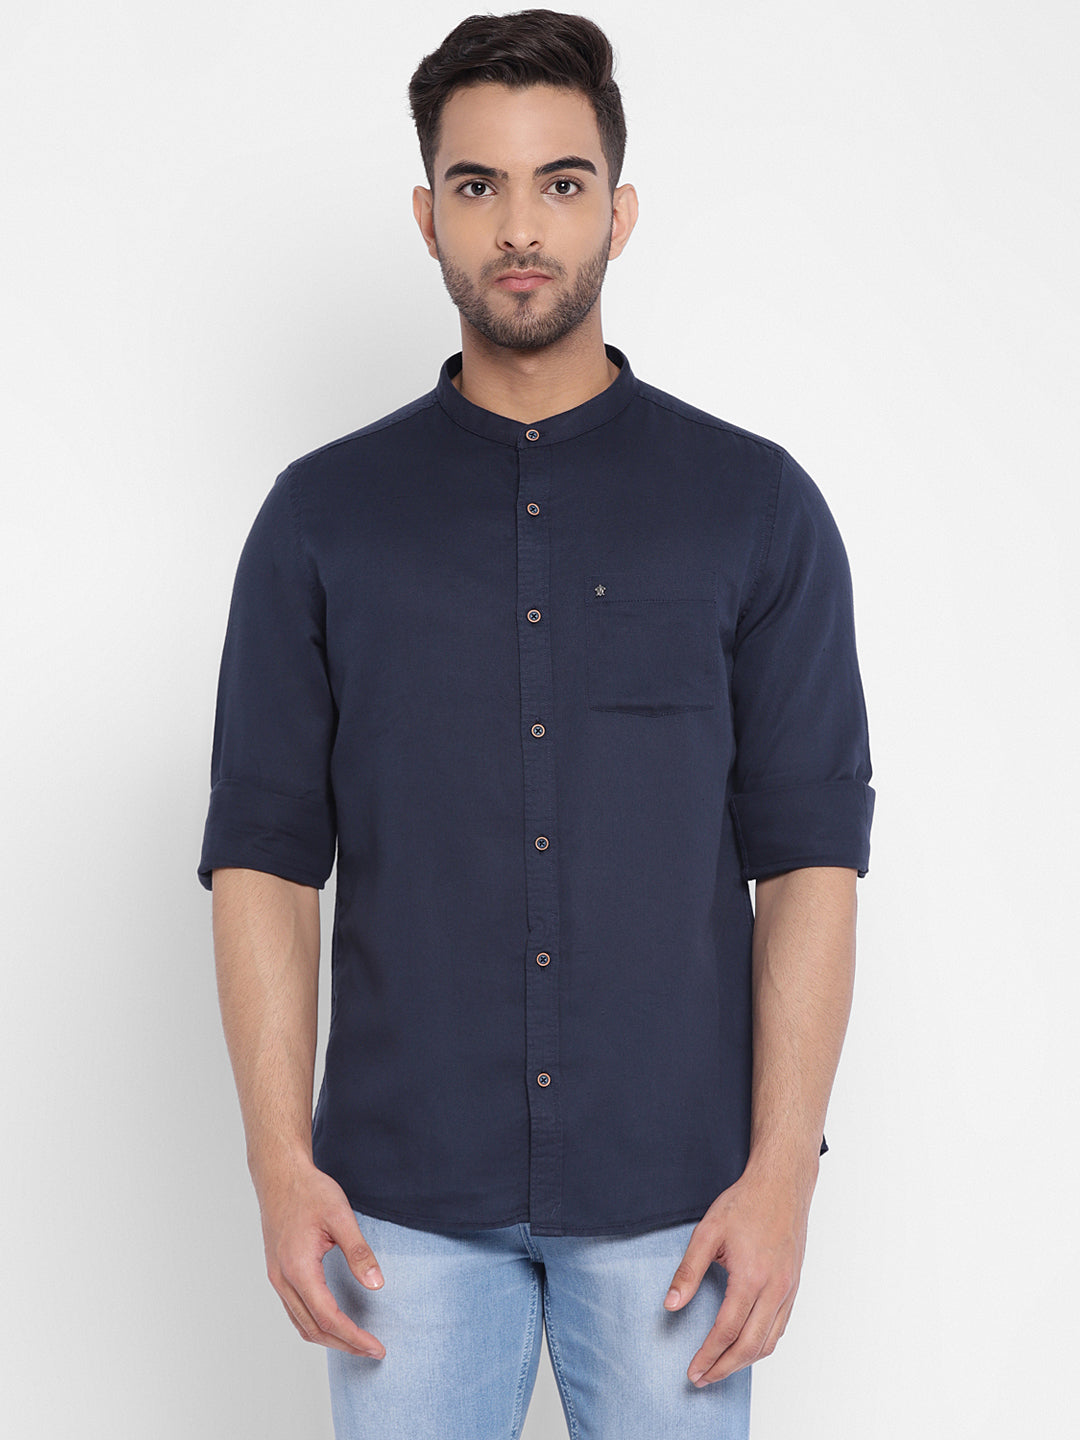 Cotton Linen Navy Blue Solid Slim Fit Casual Shirt